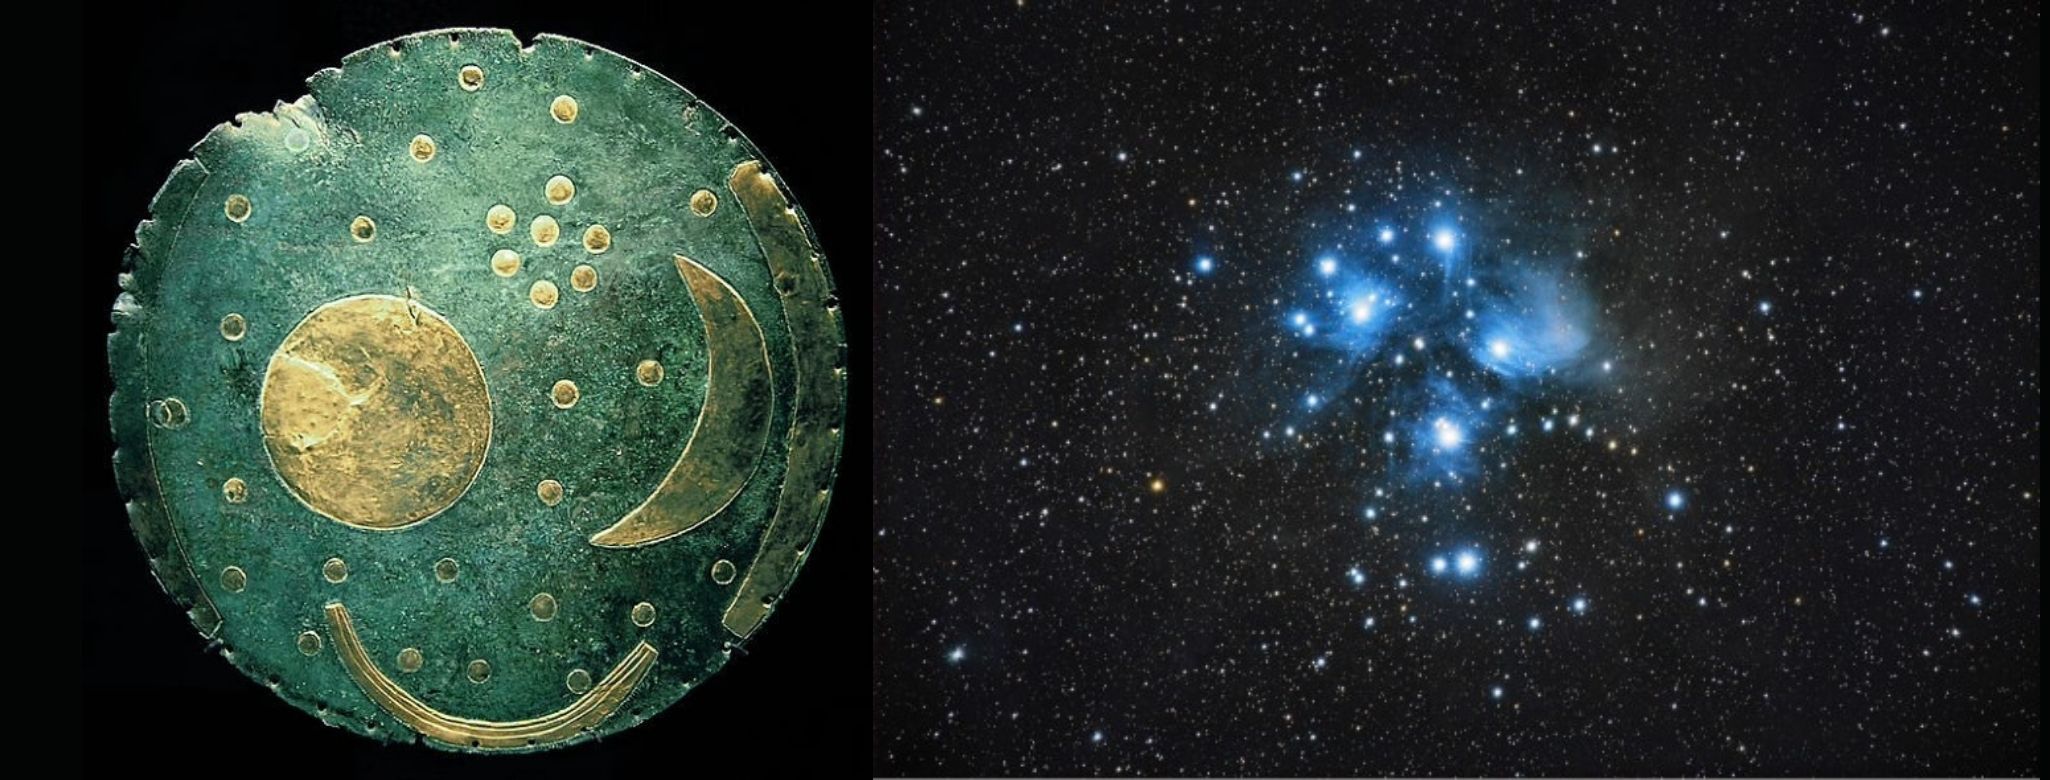 Nebra Sky Disc and Astronomy photo both showing the Pleiades